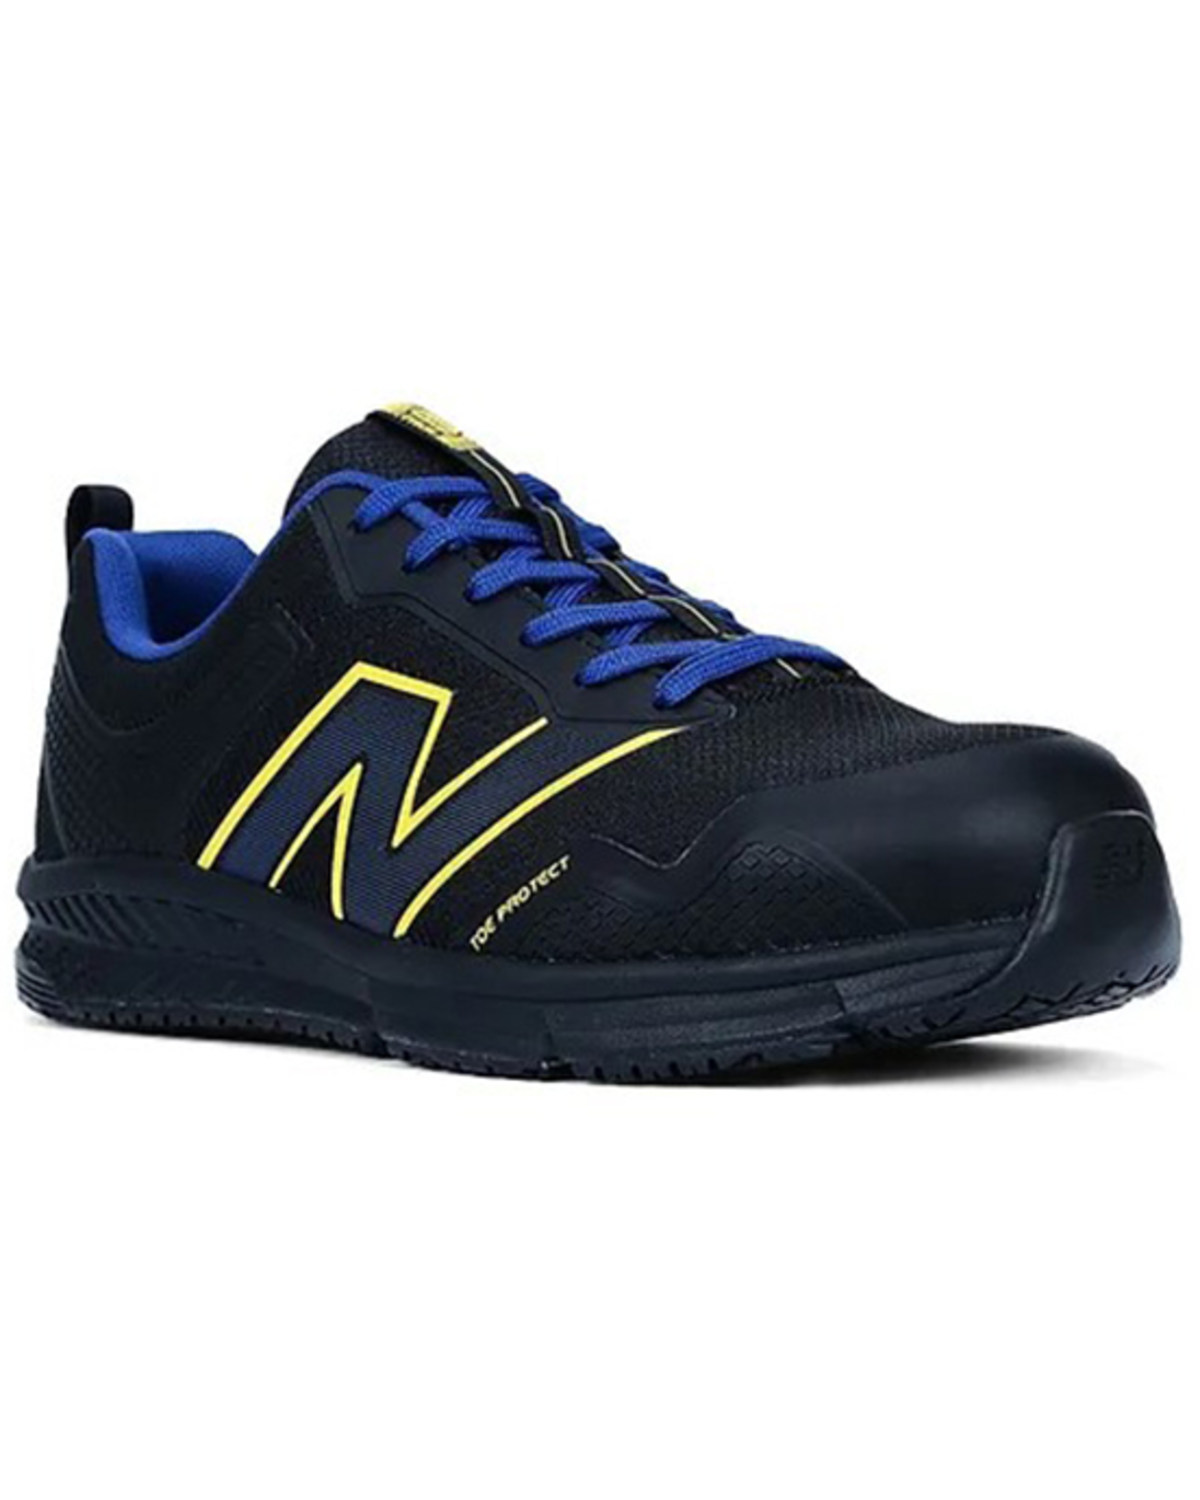 New Balance Men's Evolve Lace-Up Work Shoes